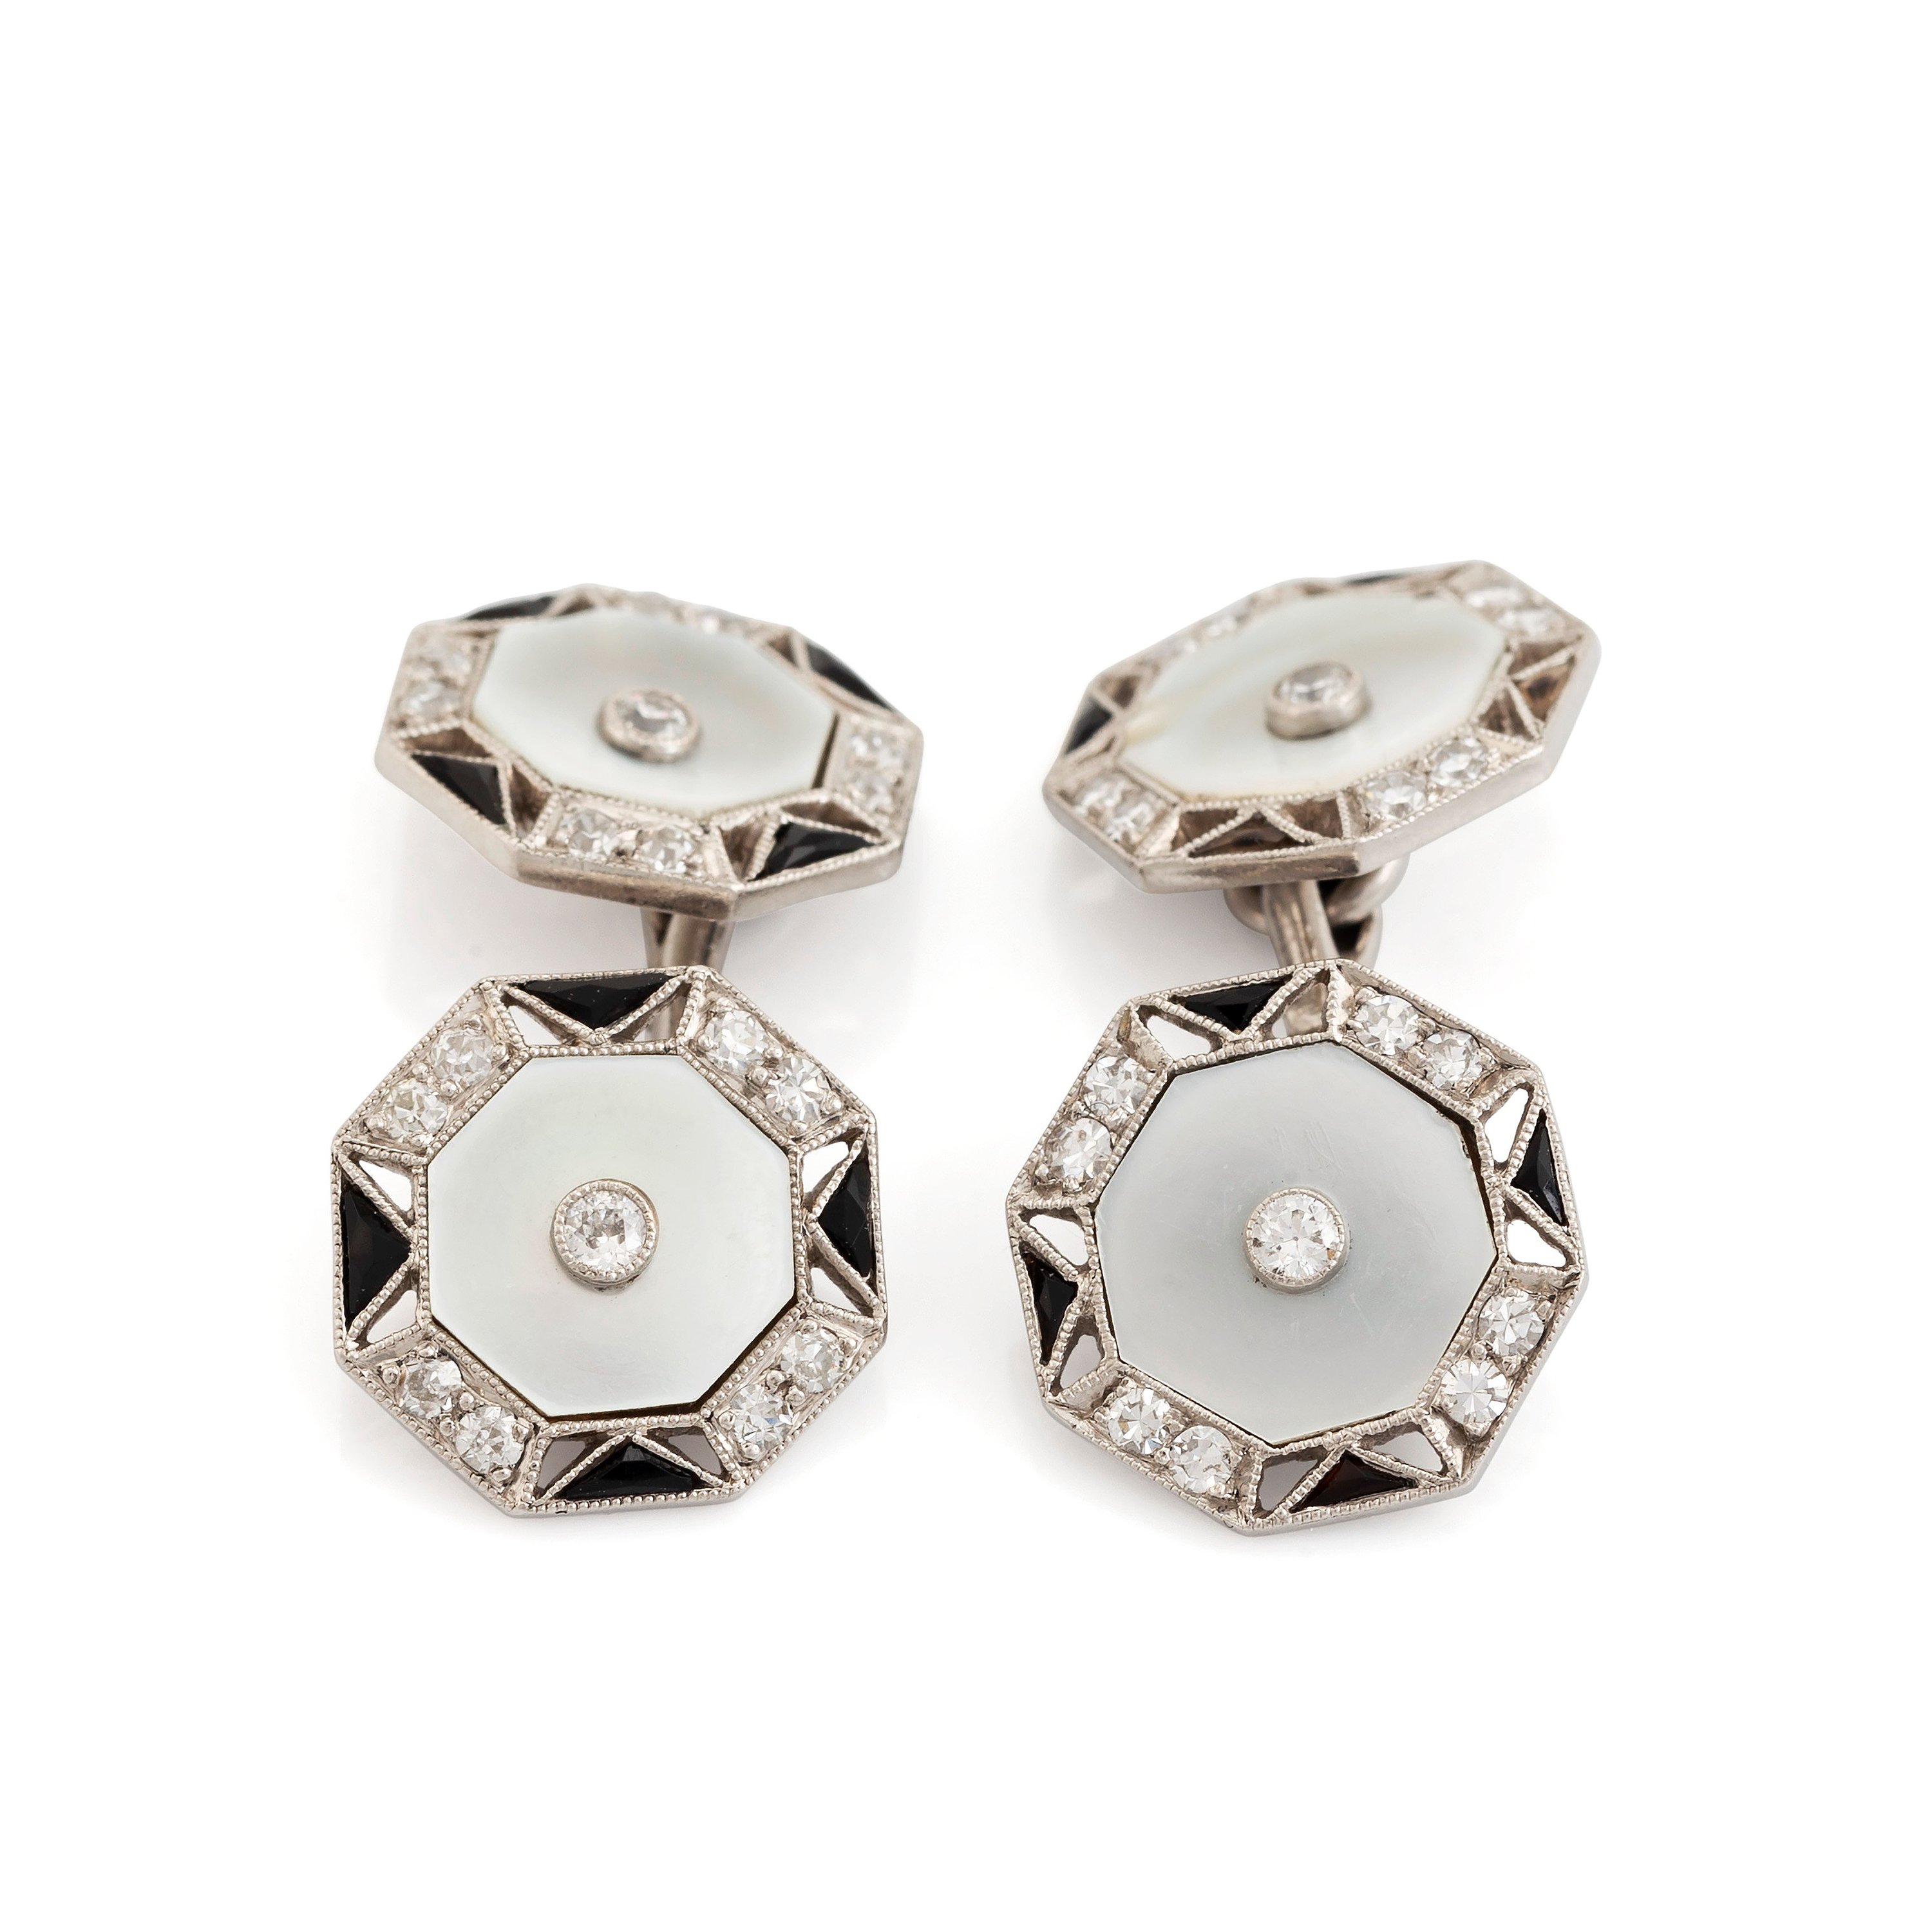 A Pair of Platinum and Mother of Pearl Cufflinks